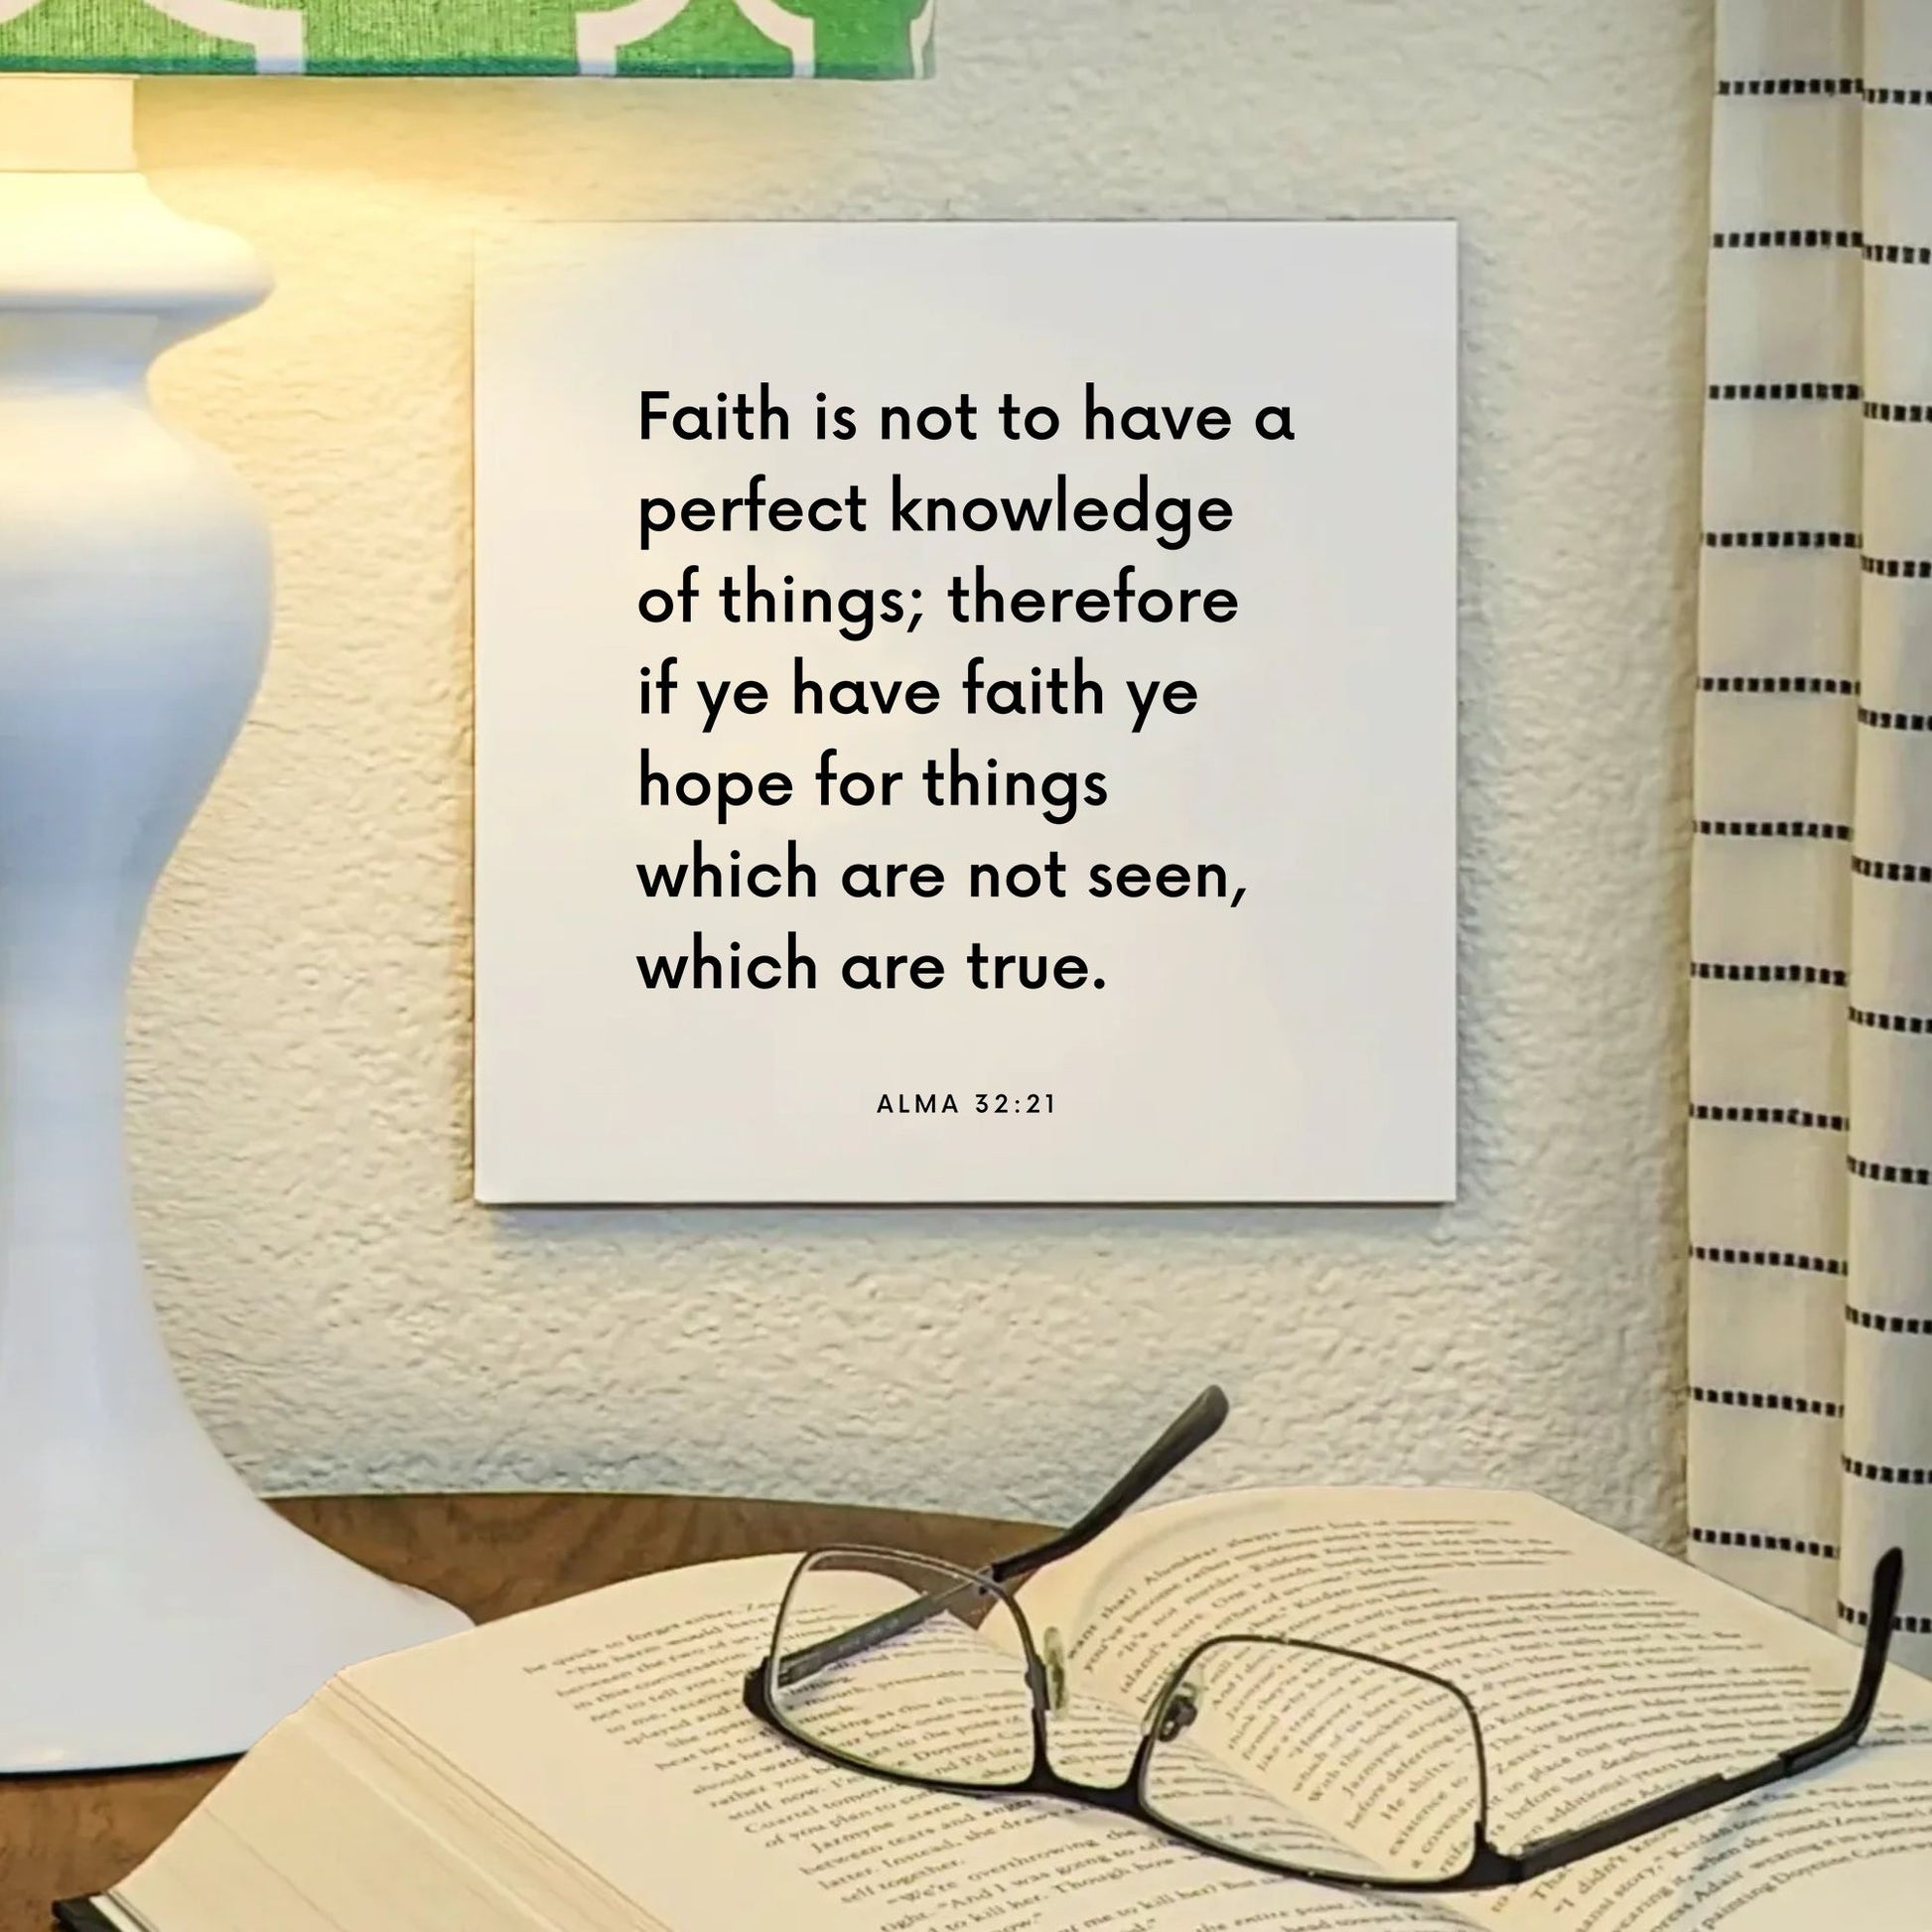 Lamp mouting of the scripture tile for Alma 32:21 - "Faith is not to have a perfect knowledge"